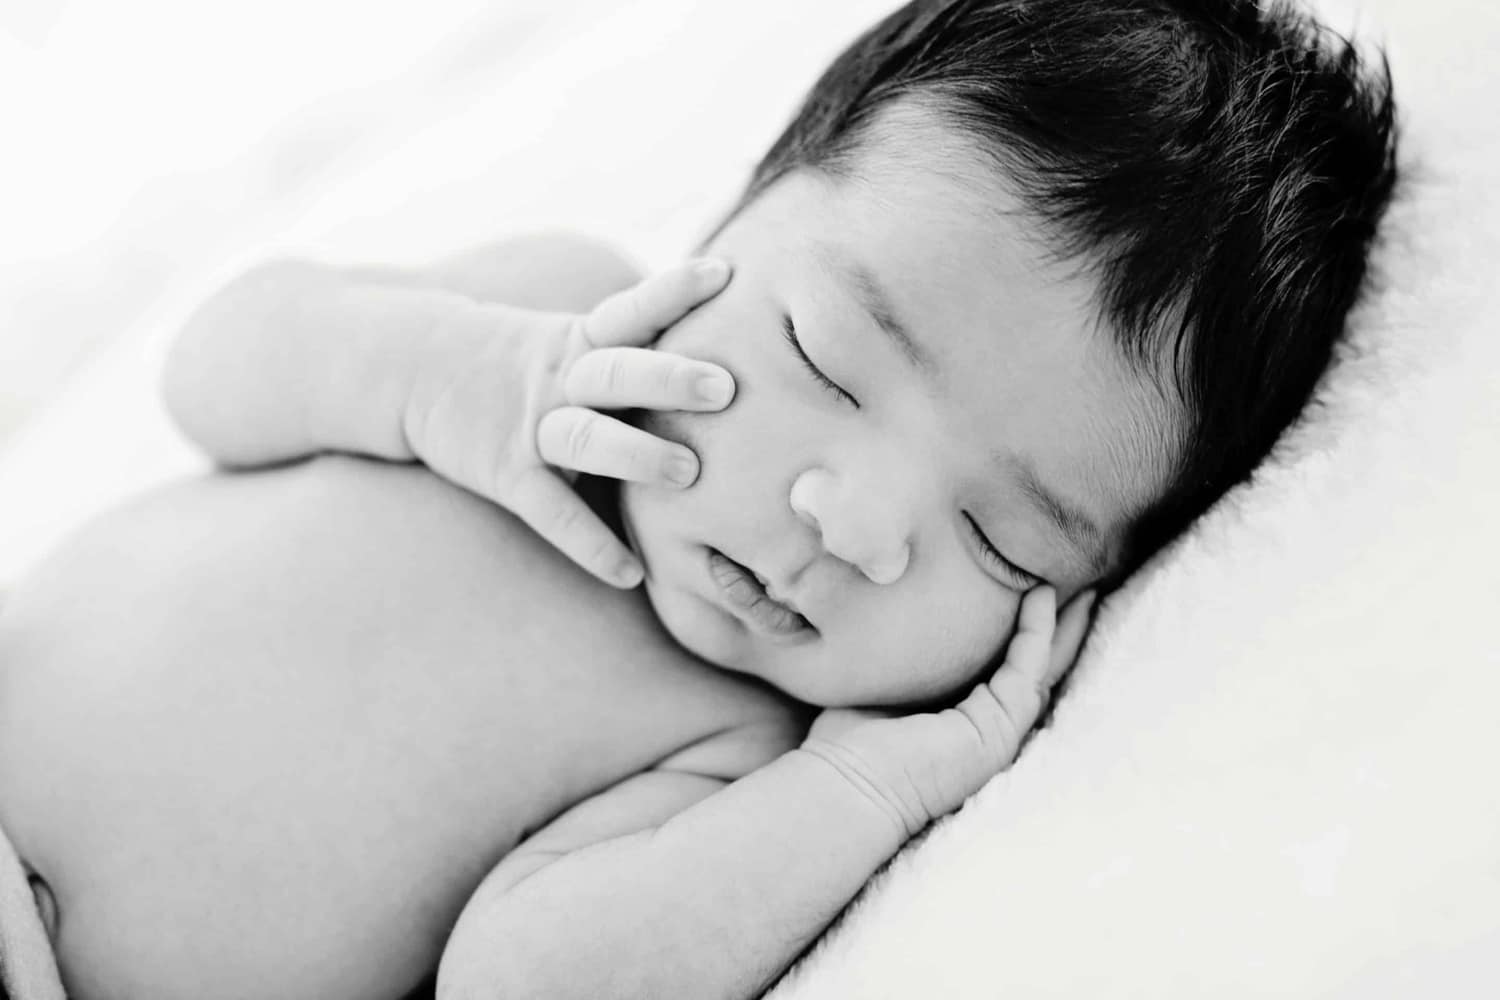 A baby touches its cheeks in a newborn photo.